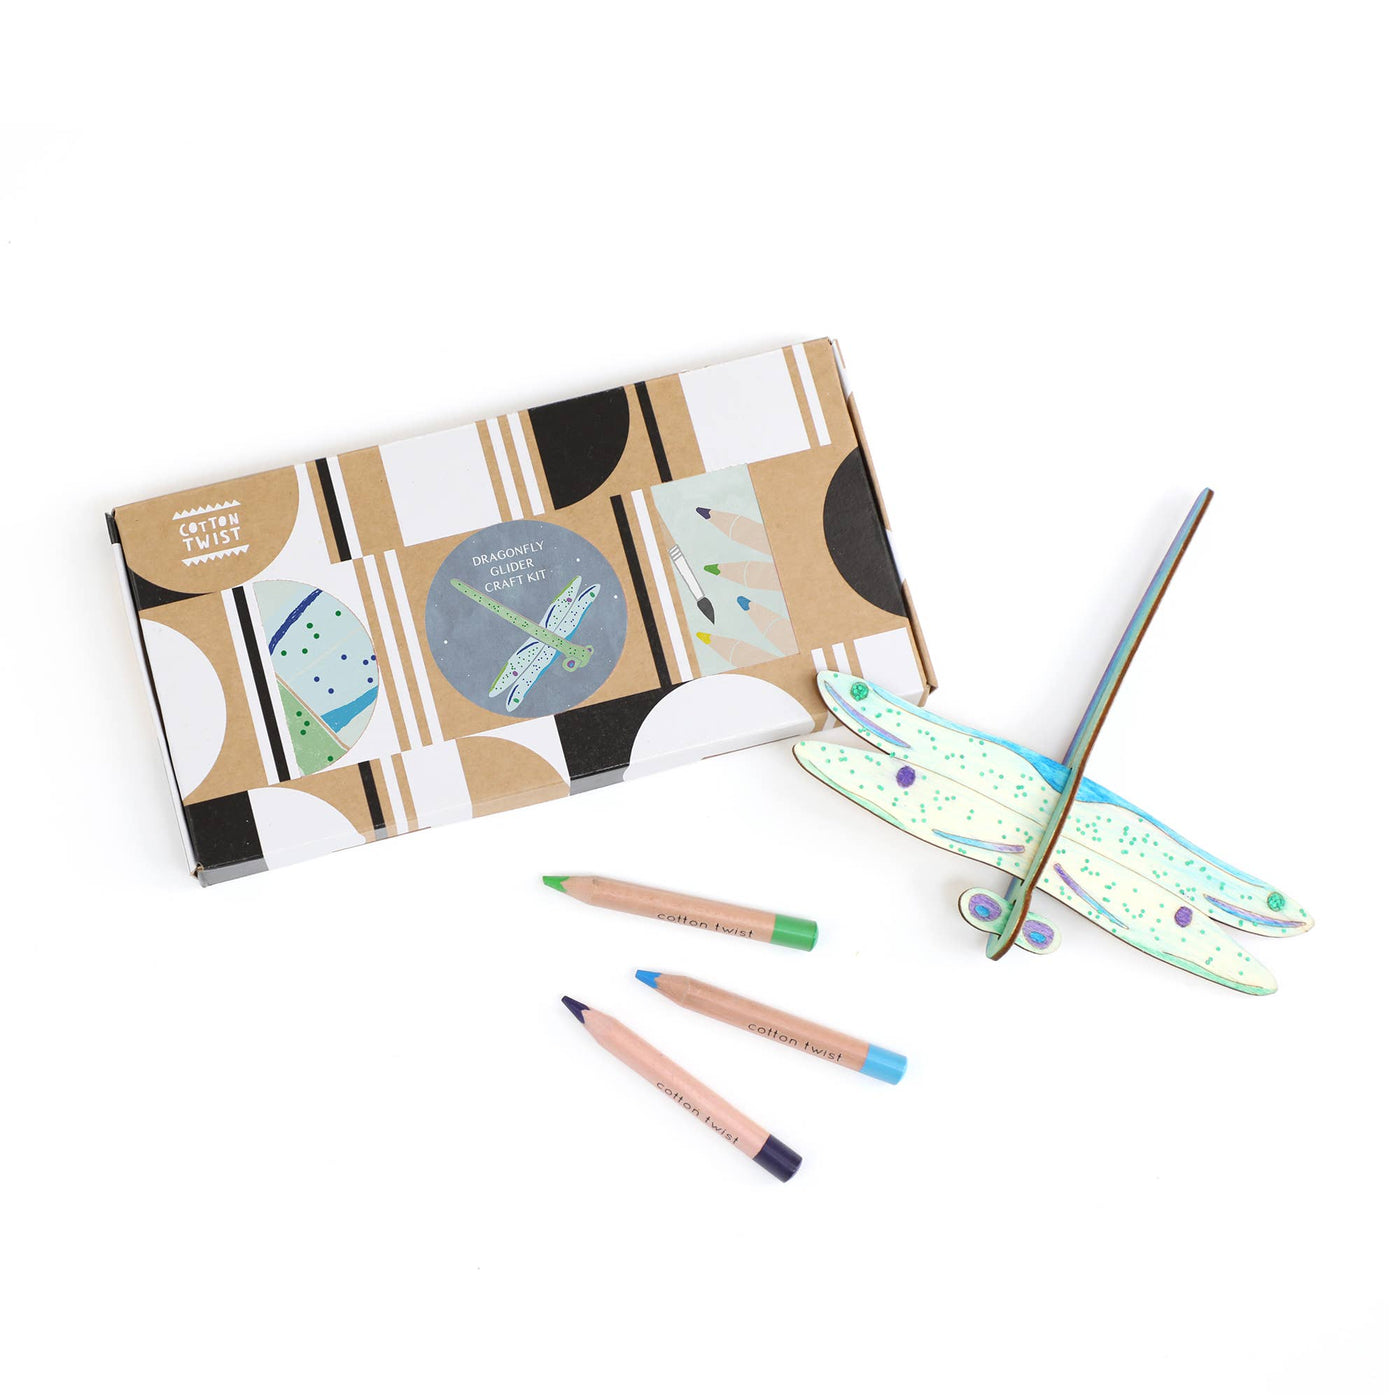 Make Your Own Dragonfly Glider Activity Kit - The Lake and Company